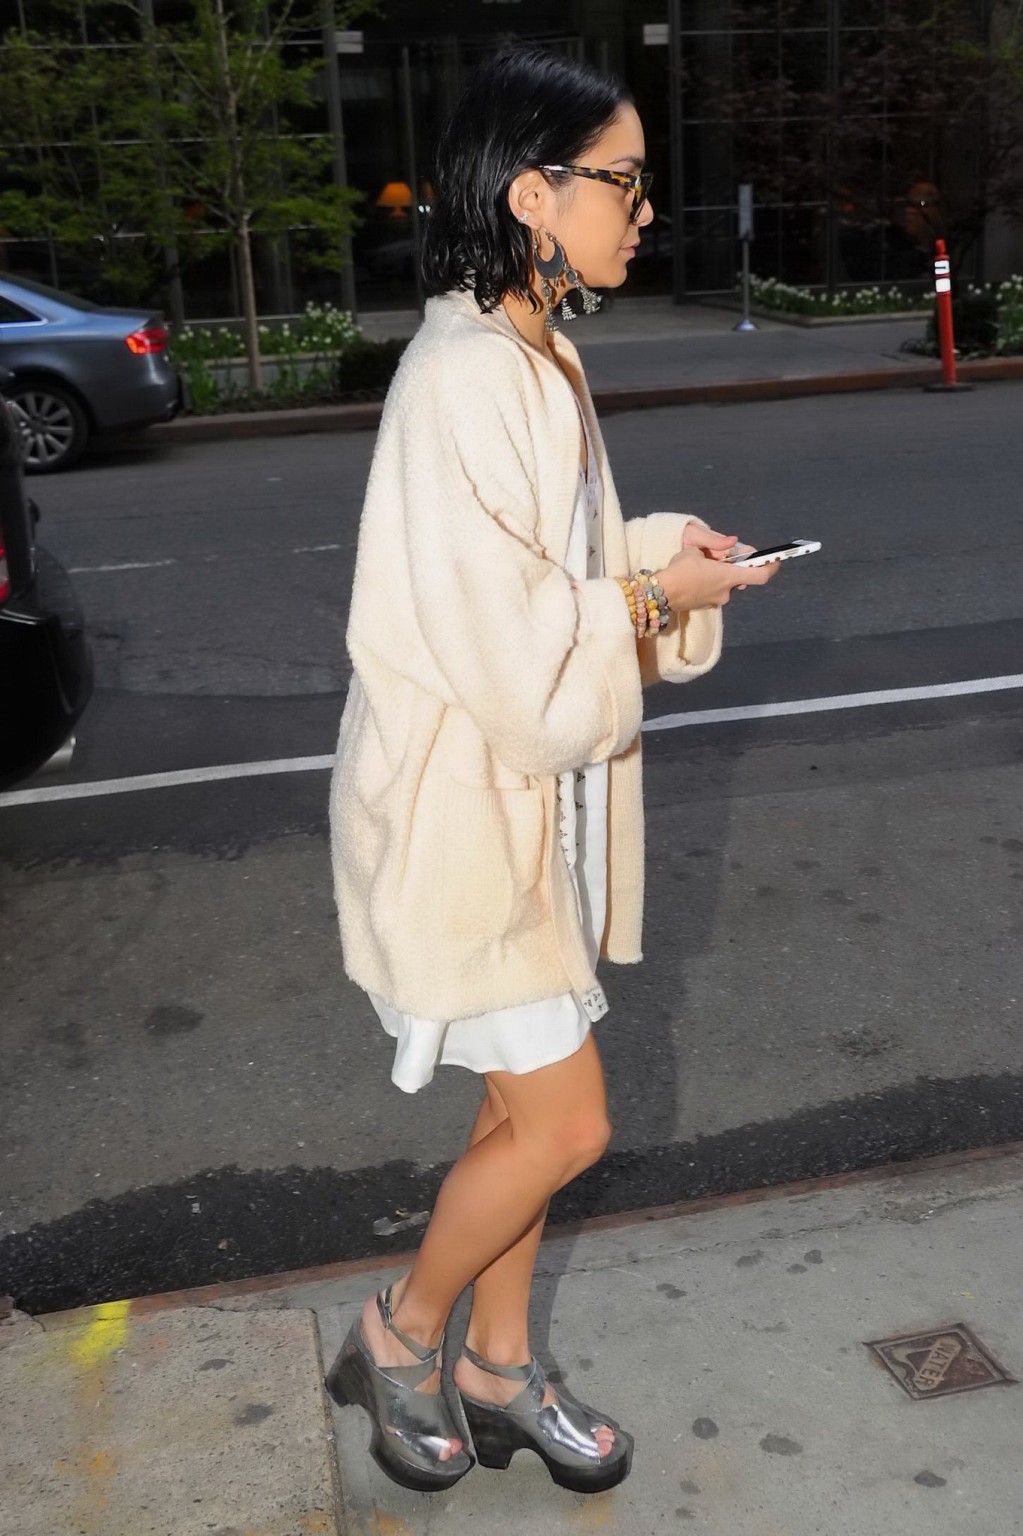 Vanessa Hudgens braless showing big cleavage in white mini dress out in NYC #75165428